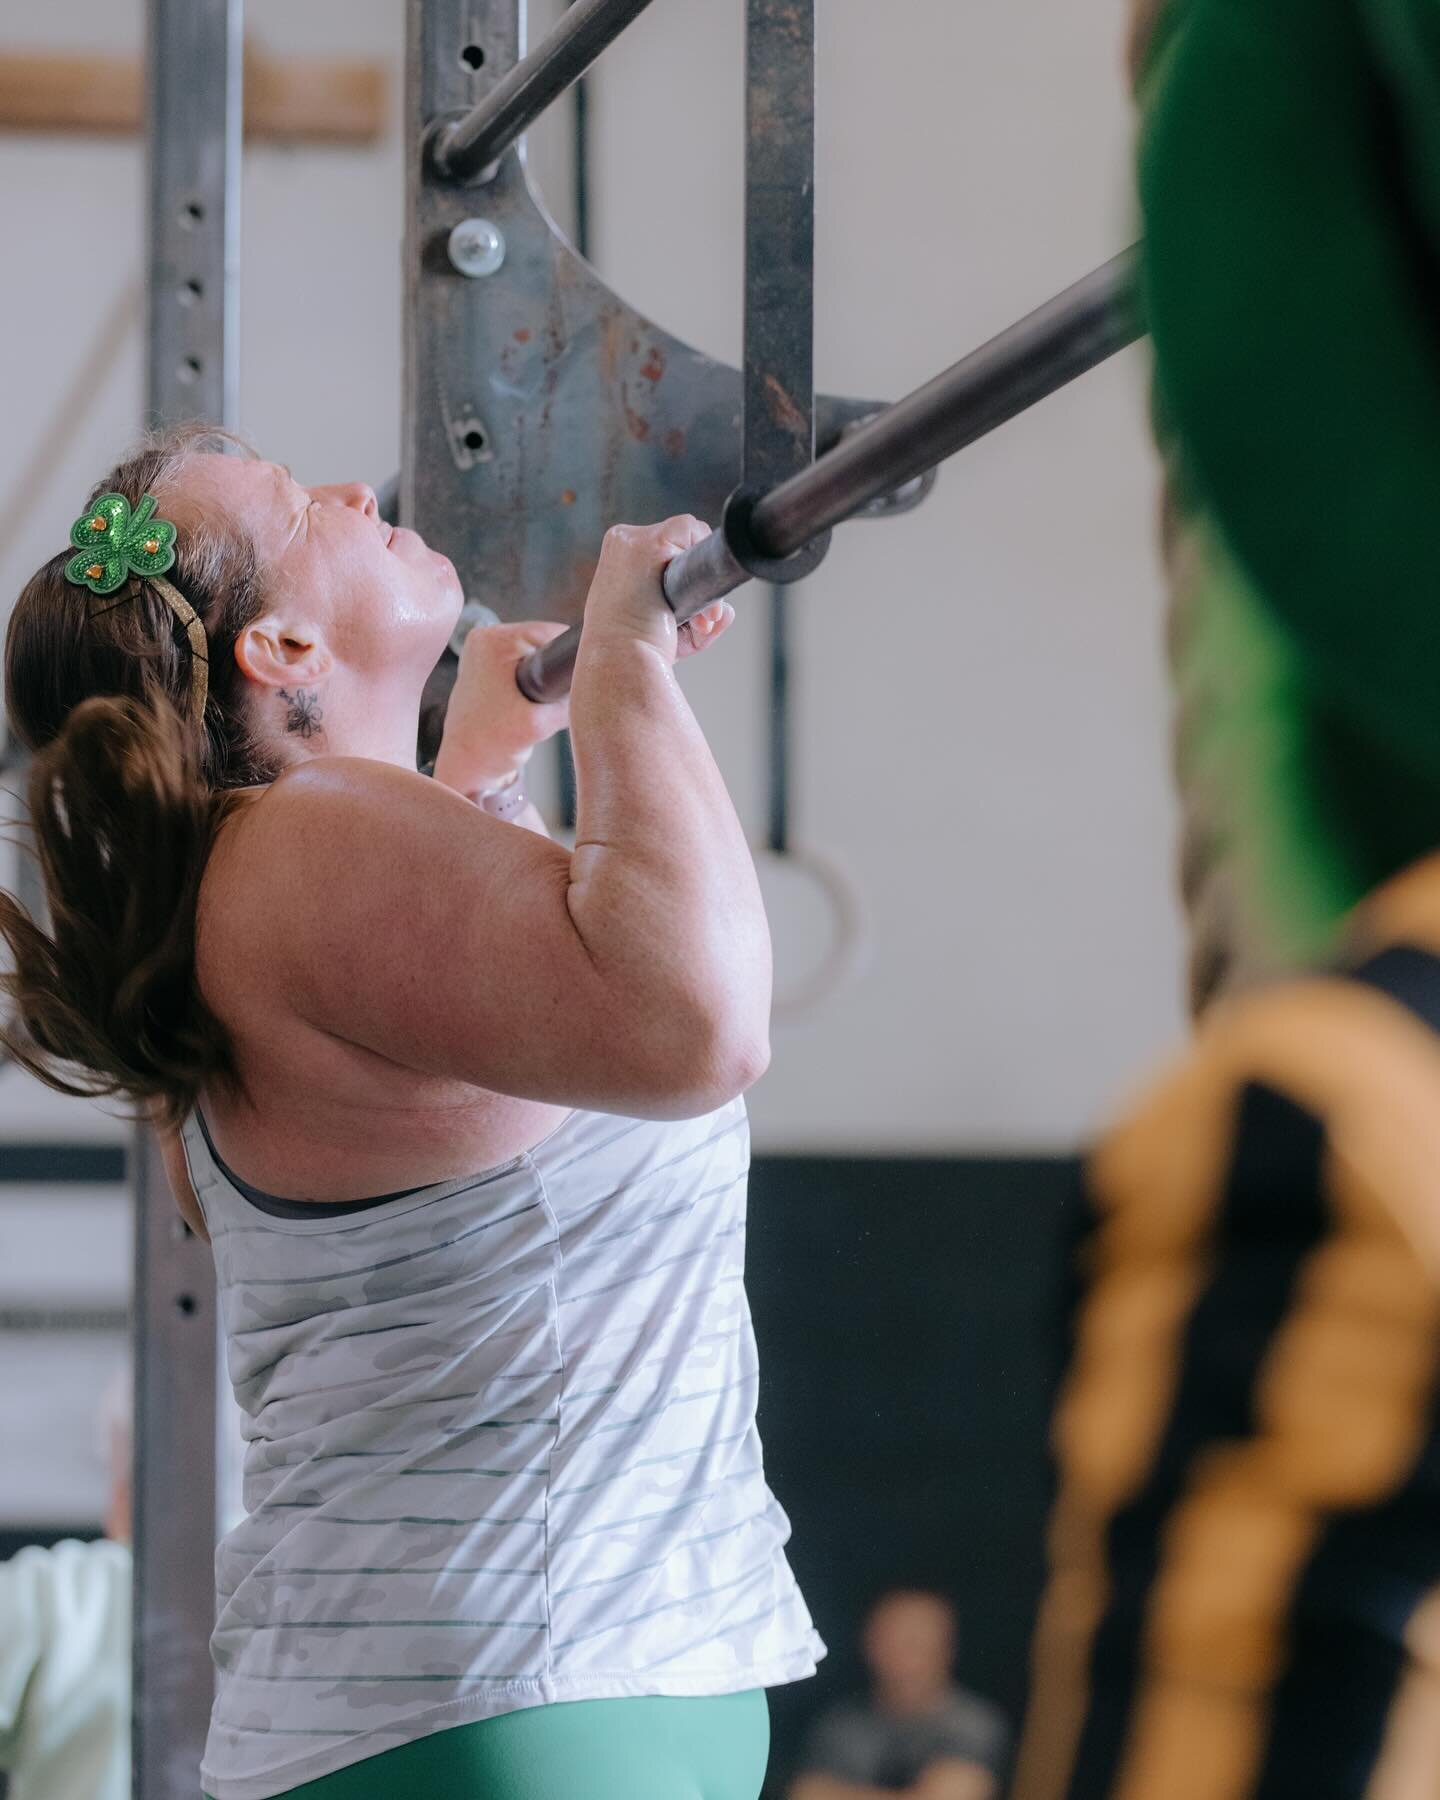 The magic of the CrossFit Open is intertwined with the camaraderie, and the push.

The camaraderie - it&rsquo;s always incredible in a CrossFit Affiliate, but during the Open it&rsquo;s amplified.

The push - in training we push ourselves to our limi